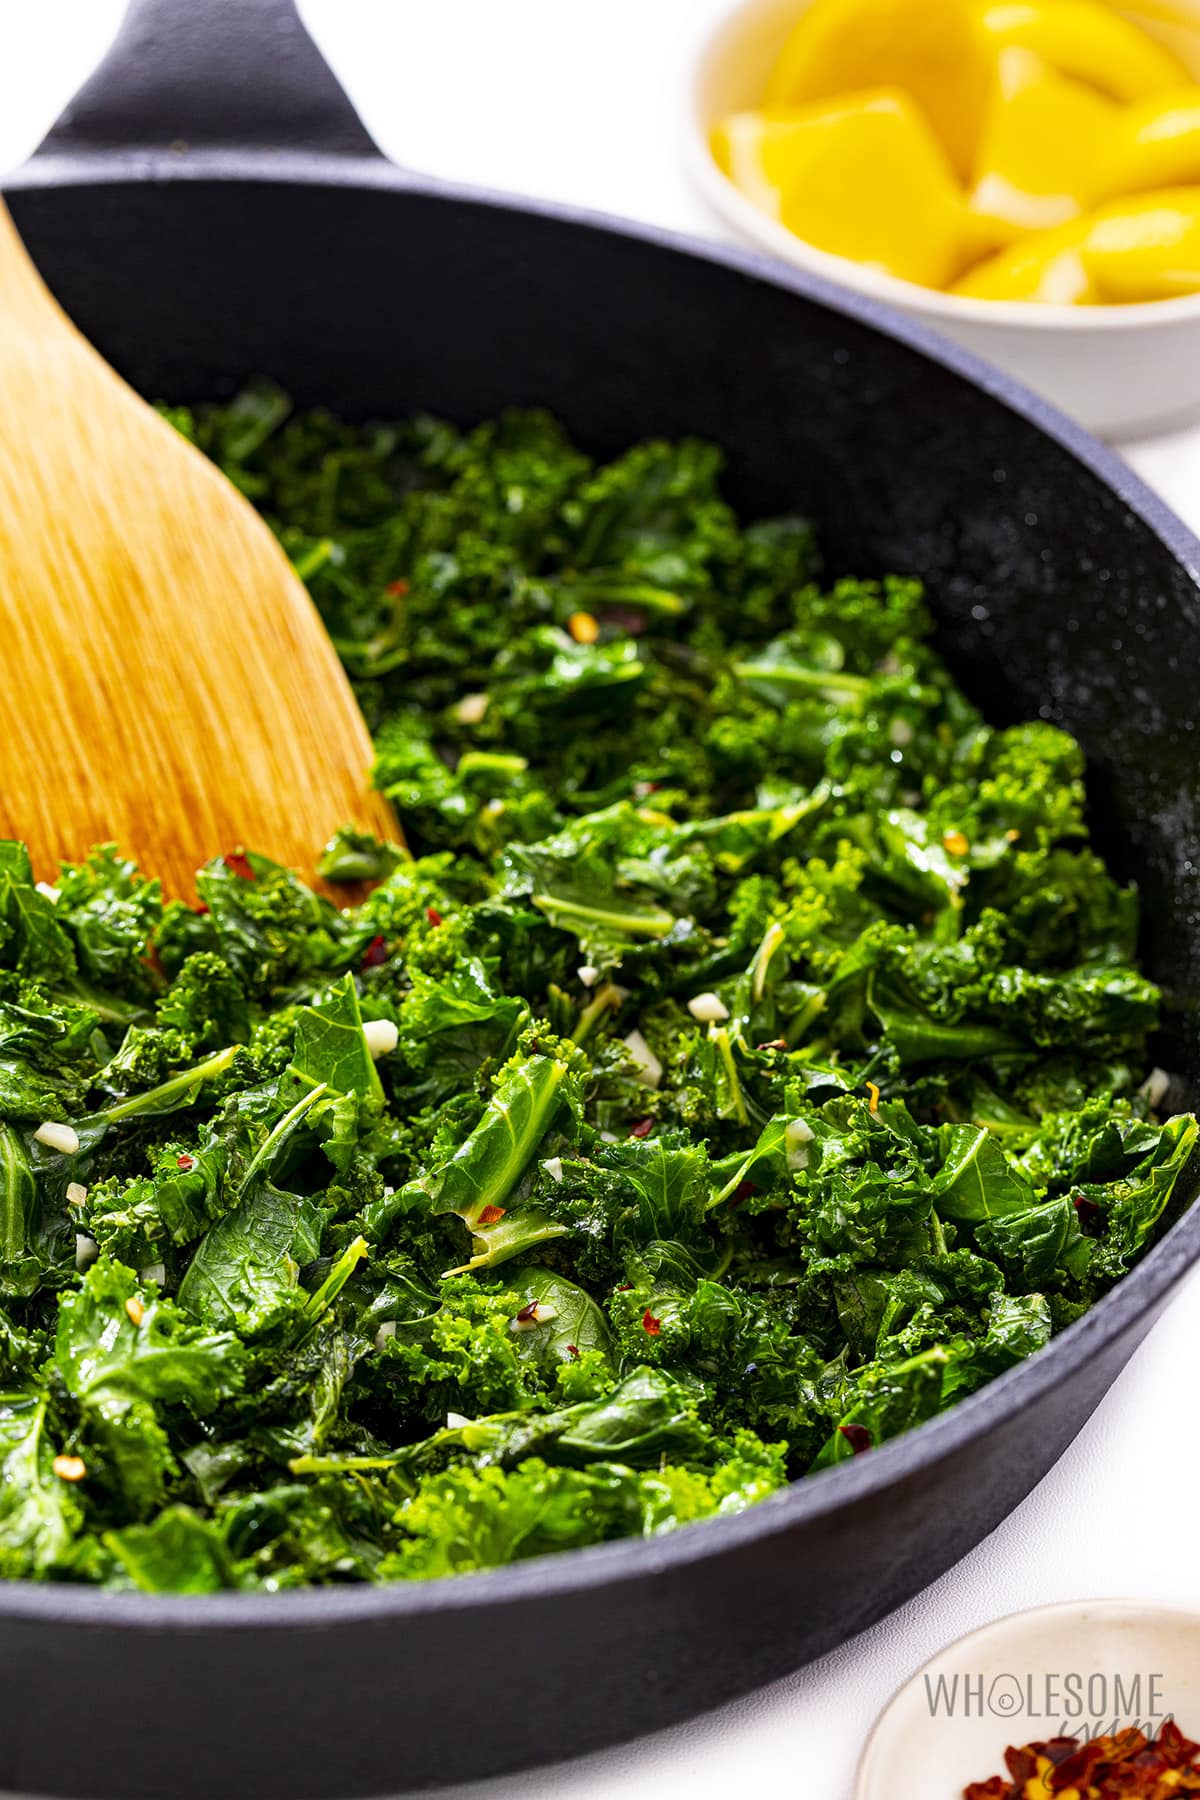 Sauteed kale in a skillet with wooden spoon.